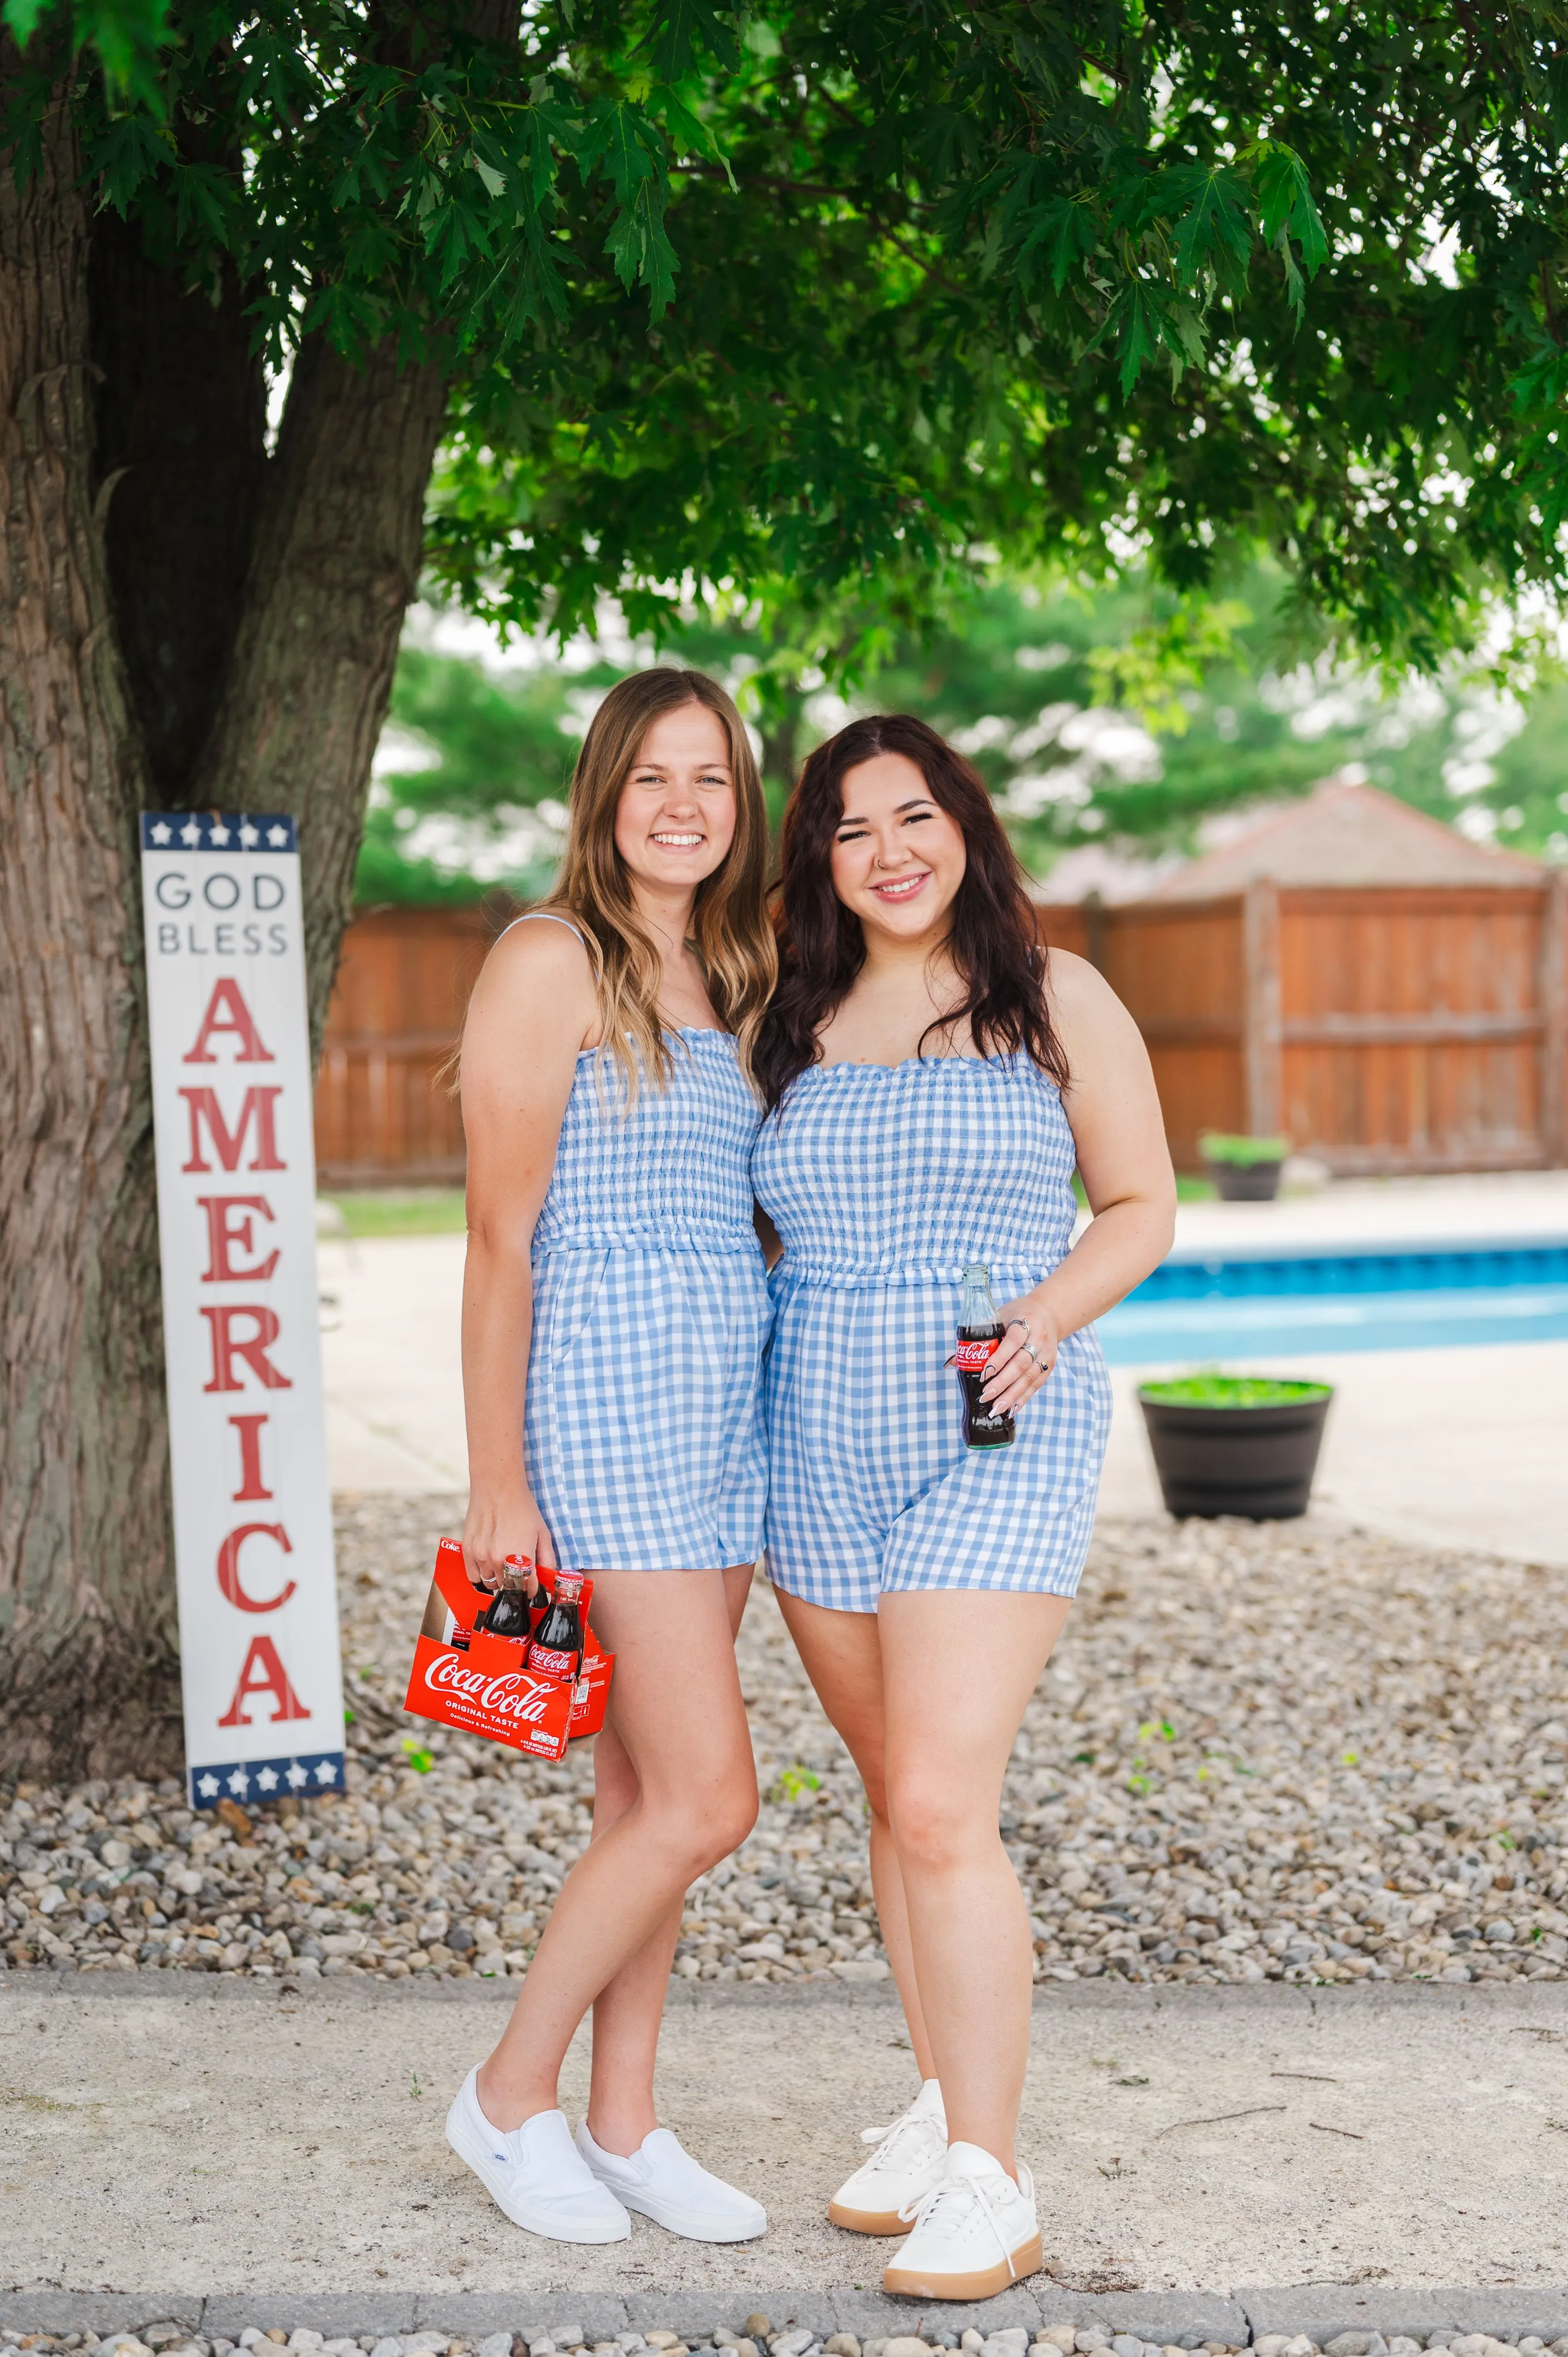 Two smiling women wearing matching blue and white checkered outfits standing by a tree with a "God Bless America" sign, one holding a Coca-Cola bottle, and the other holding a six-pack of Coca-Cola.